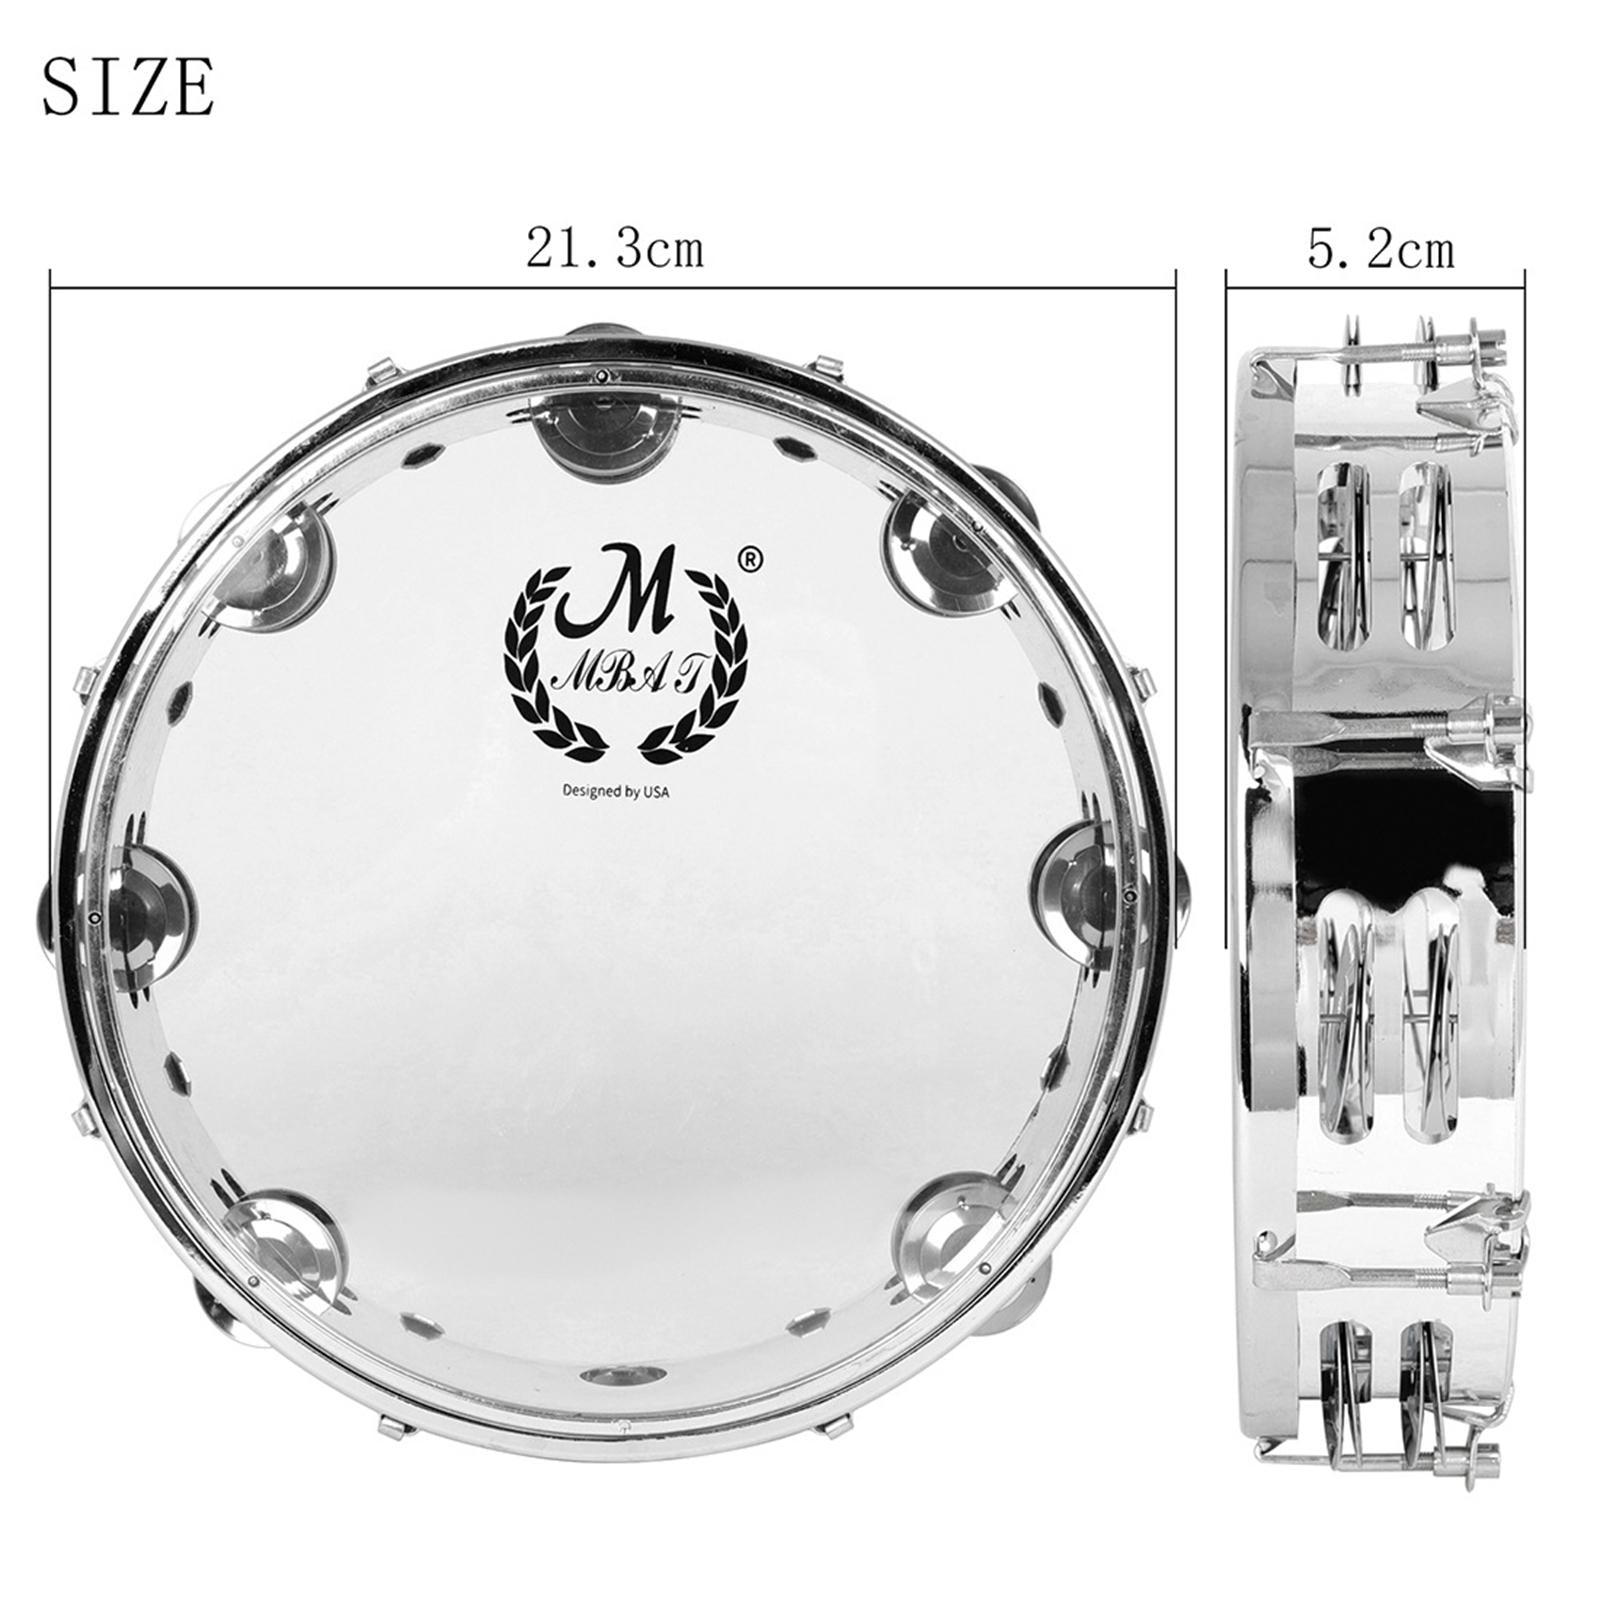 Handheld Tambourine Transparent Developmental Portable for Infant Home 8inch Clear